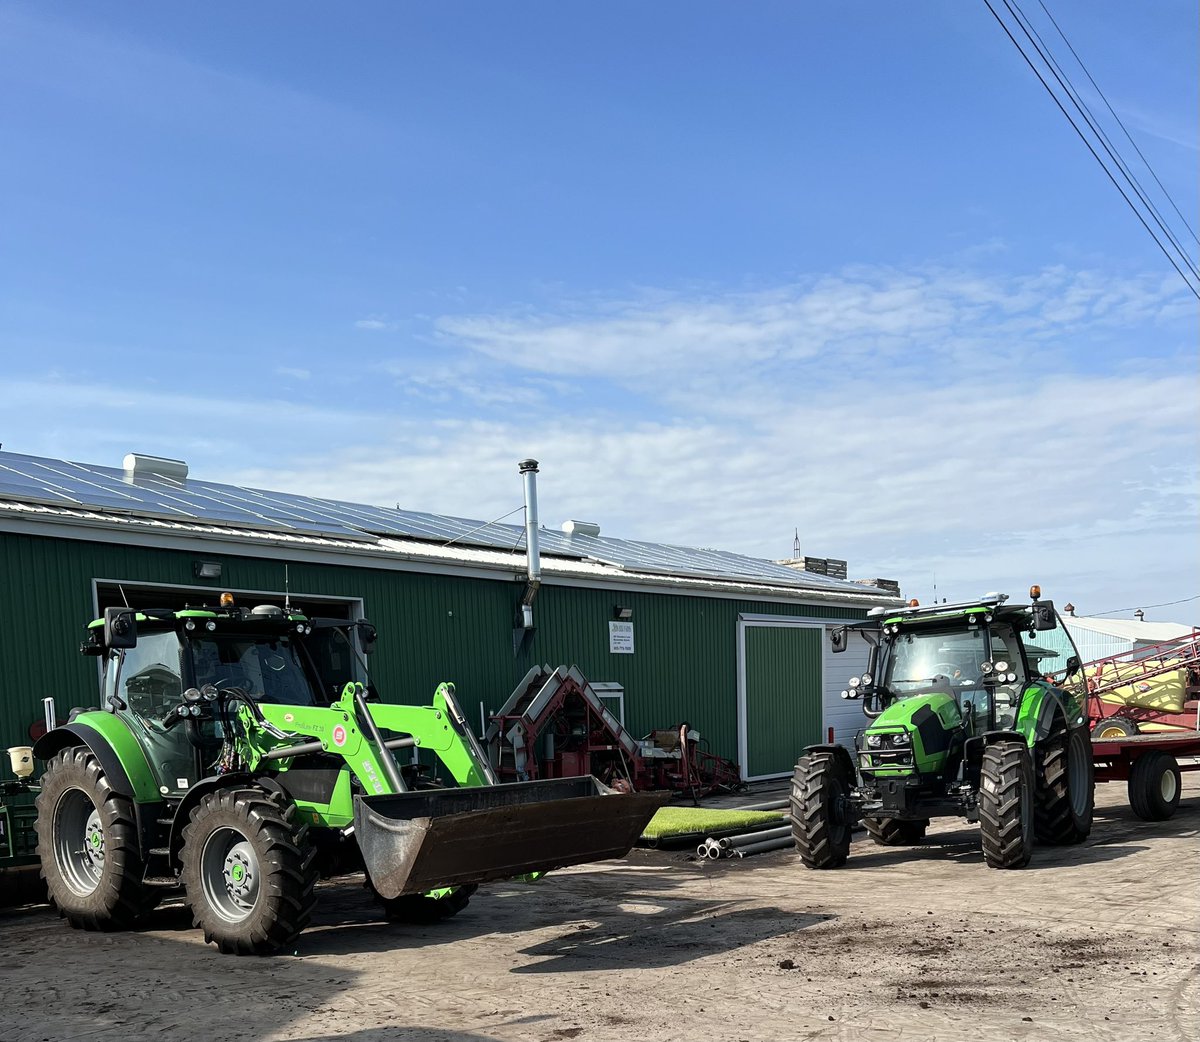 Another busy #plant23 morning at #EekFarms with 2 tractor trailers lined up to be unloaded #onion transplants and re-loaded with empty racks #OntAg #CdnAg #AgricultureMatters #feedingpeoplematters #AgBusiness #SpecialtyCropArea #HollandMarsh #KingTownship #YorkRegion #DeutzFahr